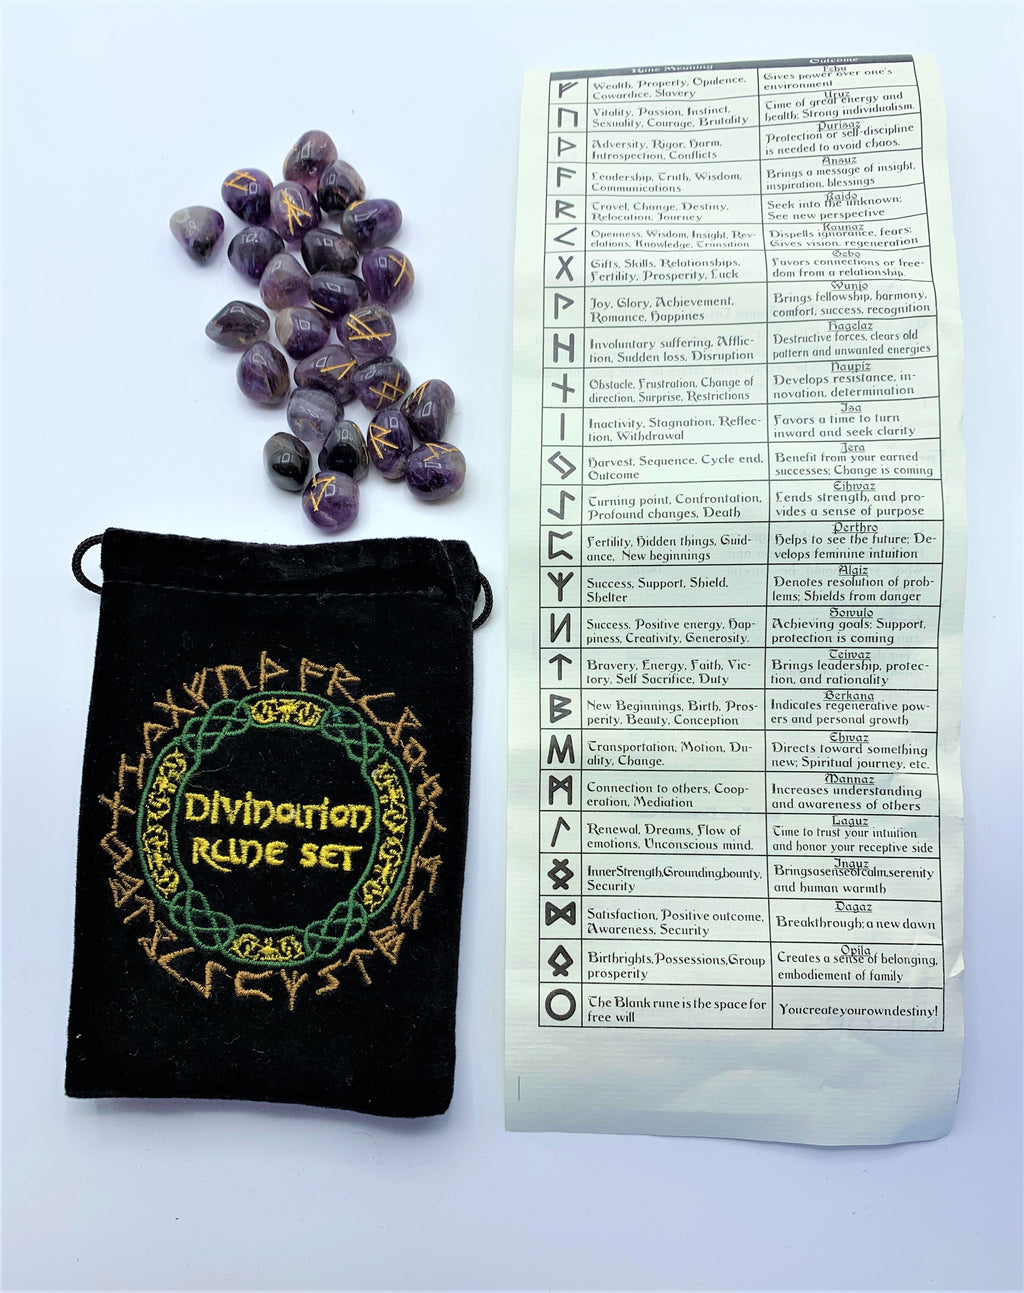 Amethyst Rune set with a runic symbol (in gold) on each stone. The set comes in a black bag embroidered on the front in green, yellow and light brown/gold with runic designs and the words "Divination Rune Set." Comes with a rolled up sheet of paper displaying each rune and its meaning. 